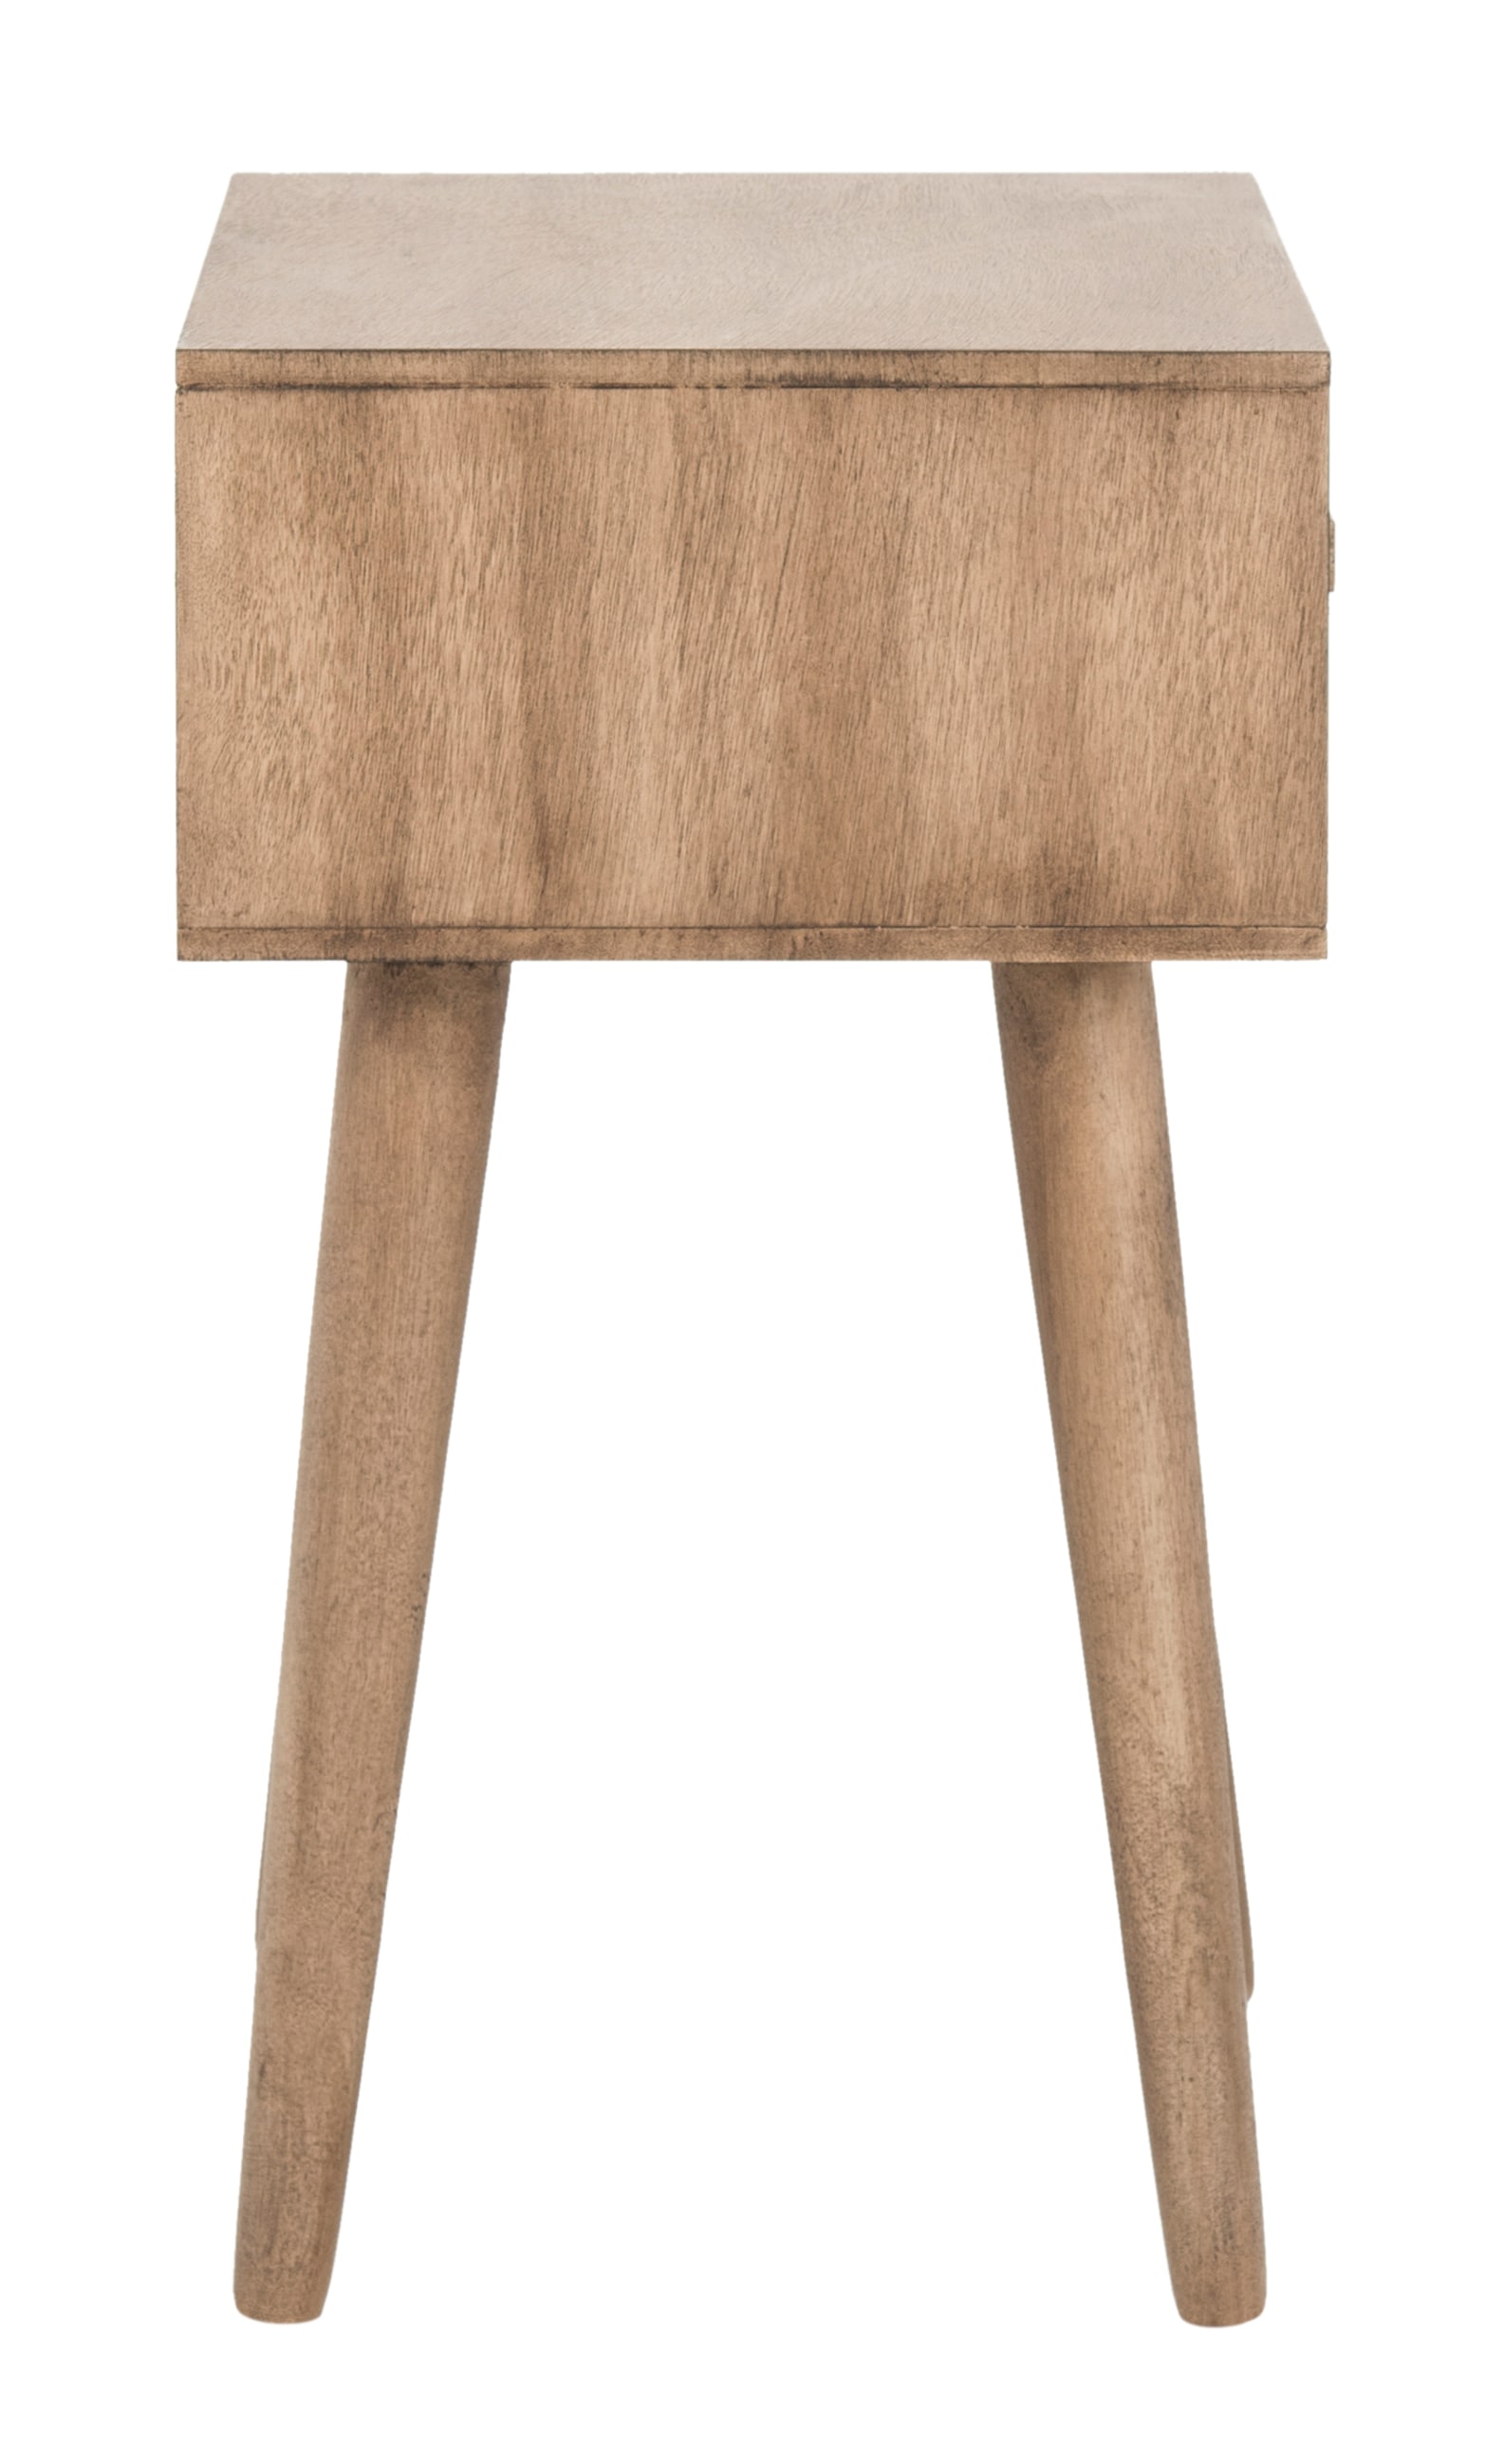 Safavieh Lyle Desert Brown Wood End Table with Storage at Lowes.com